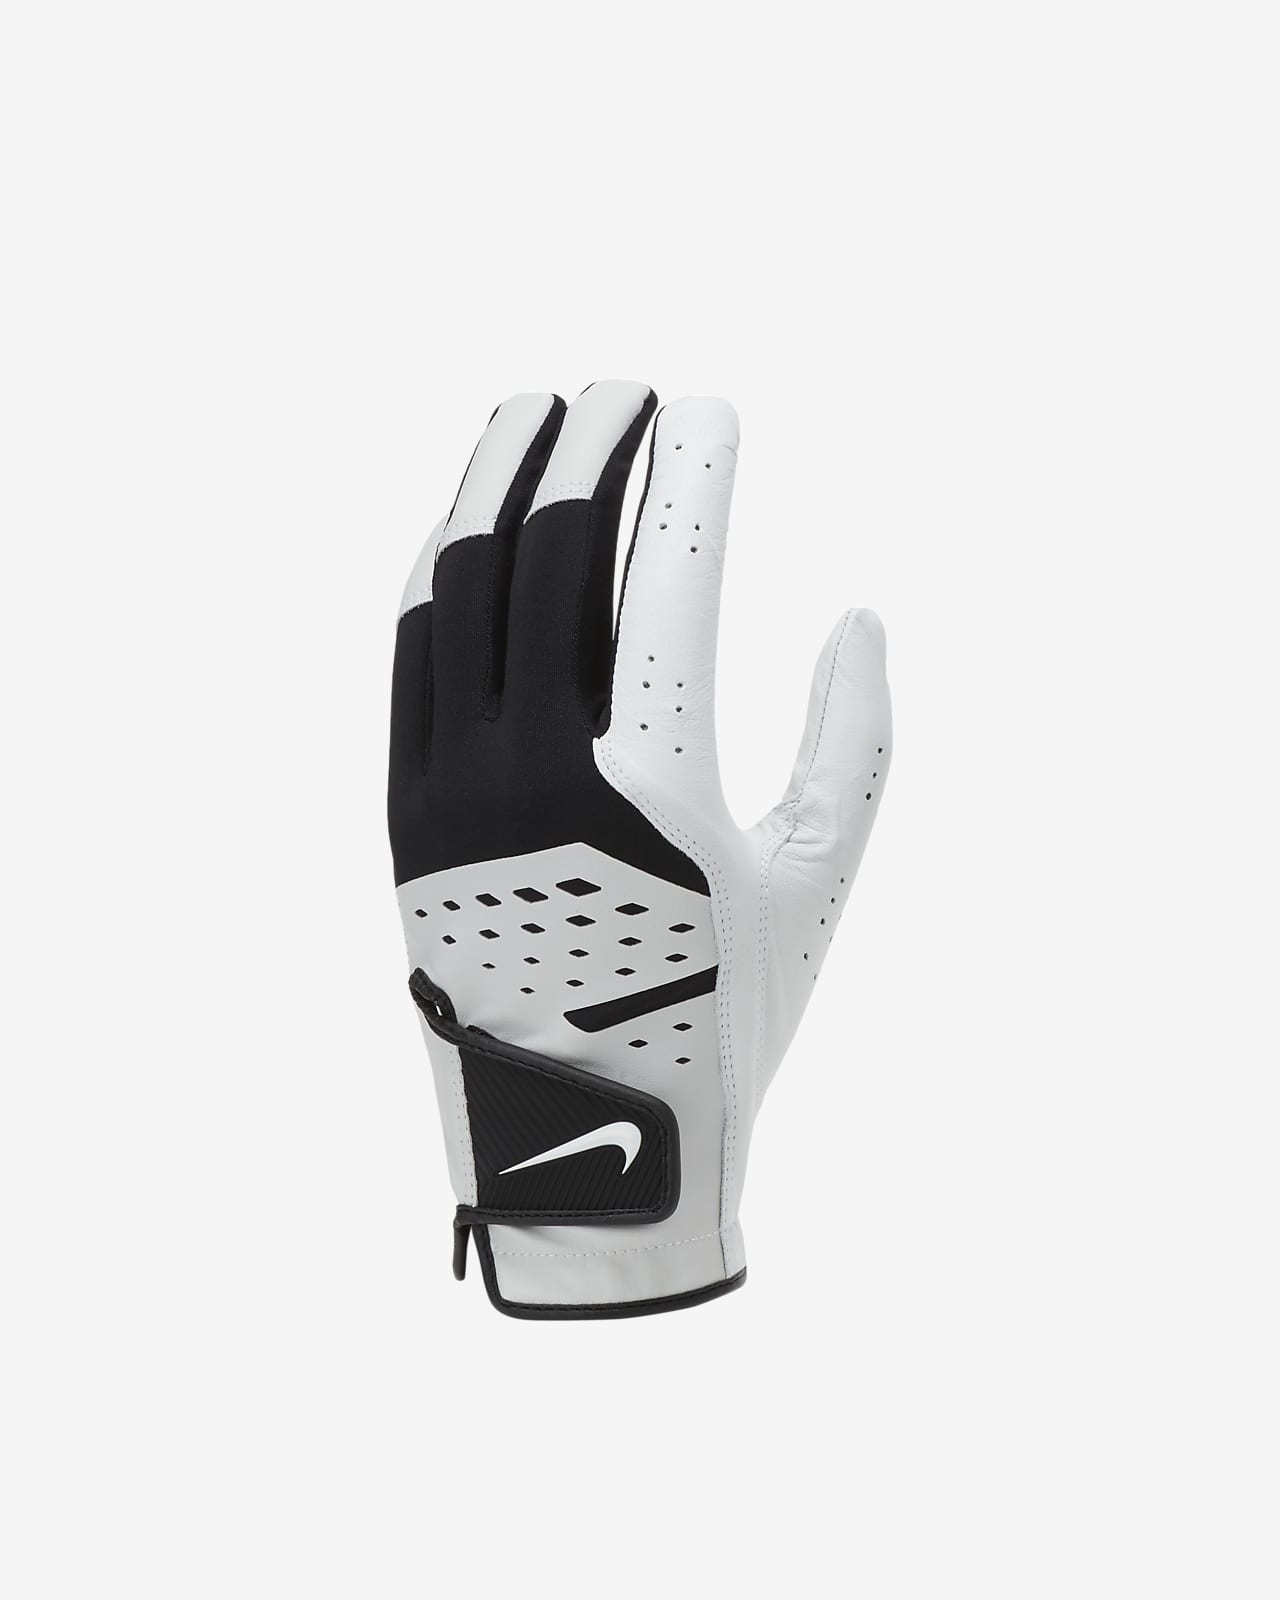 Nike Gants Musculation - Extreme Homme - black/anthracite/white